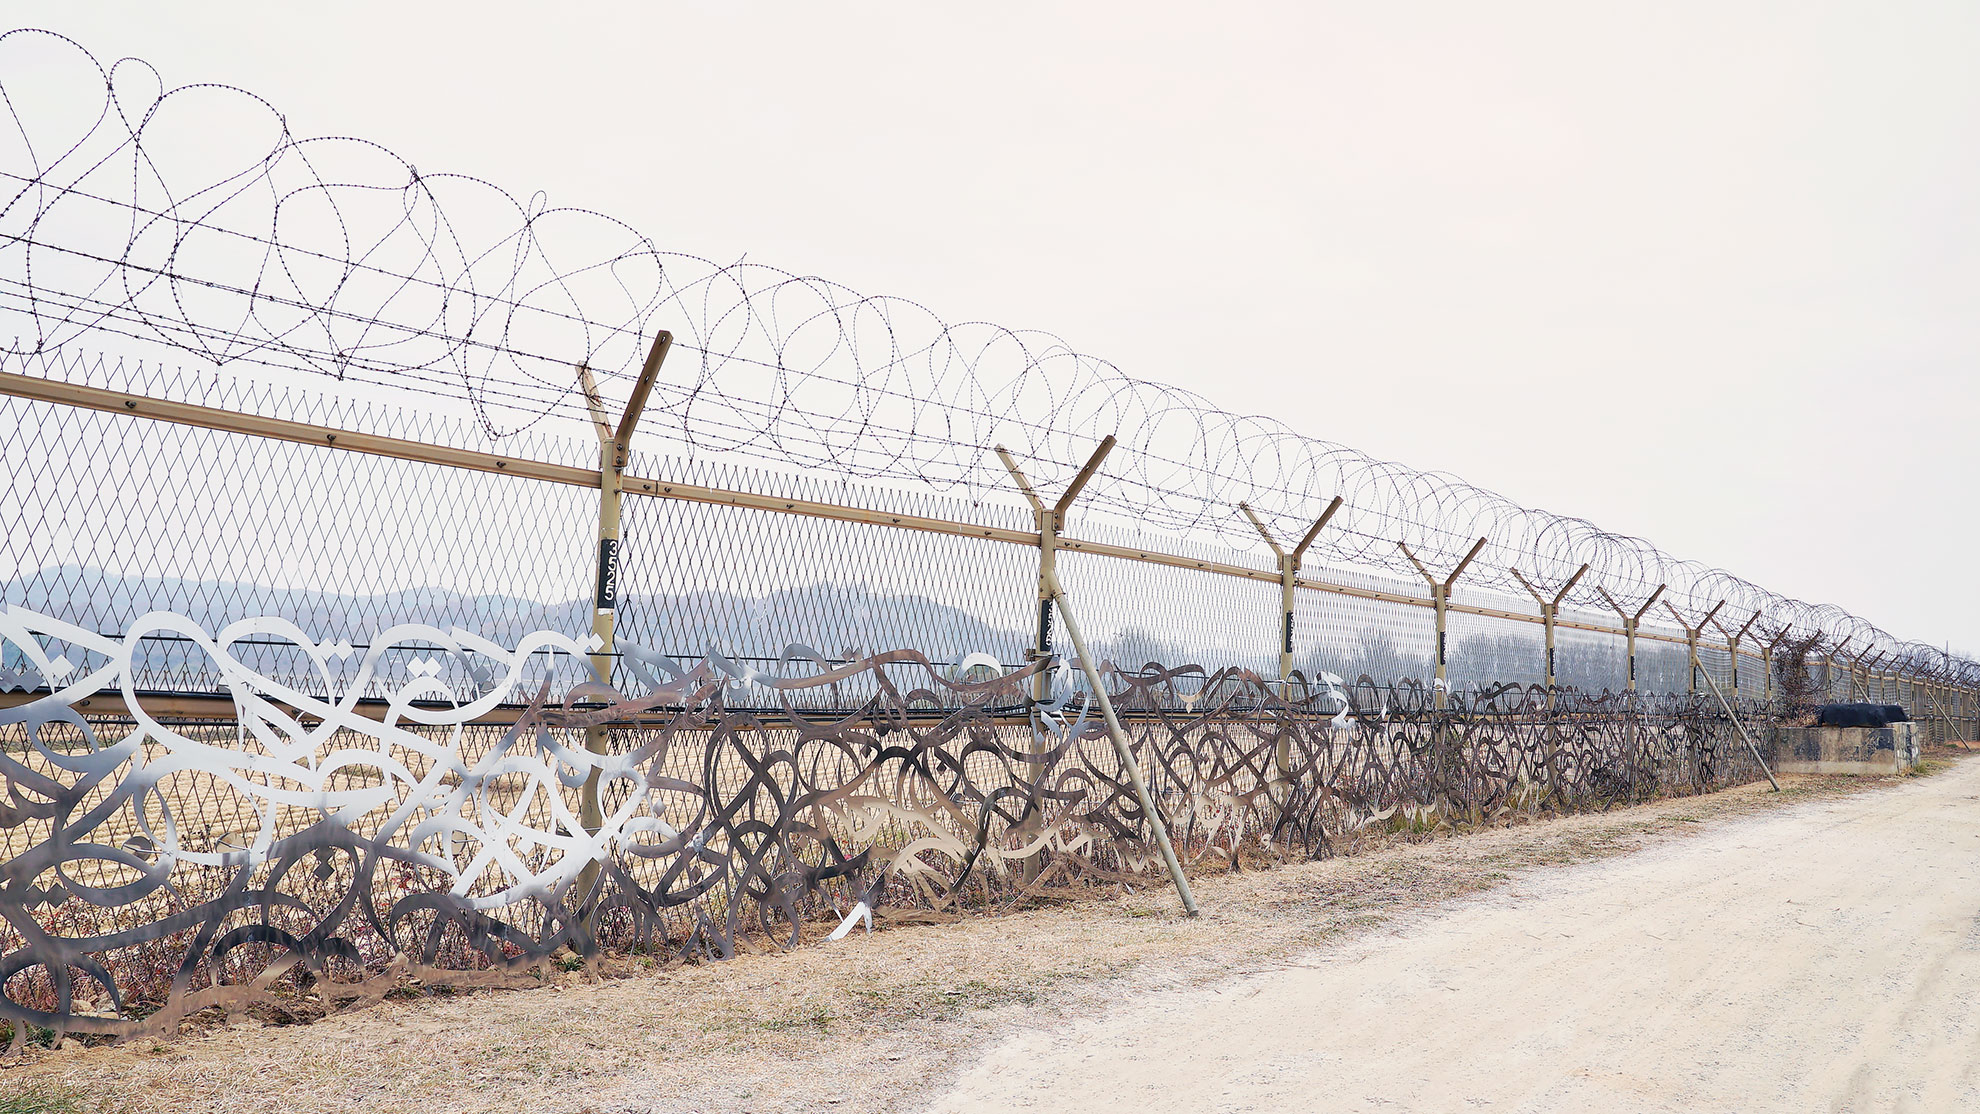  The barbed wire fence between North and South Korea represents discord and violence. eL Seed's artwork is a message of unity. 